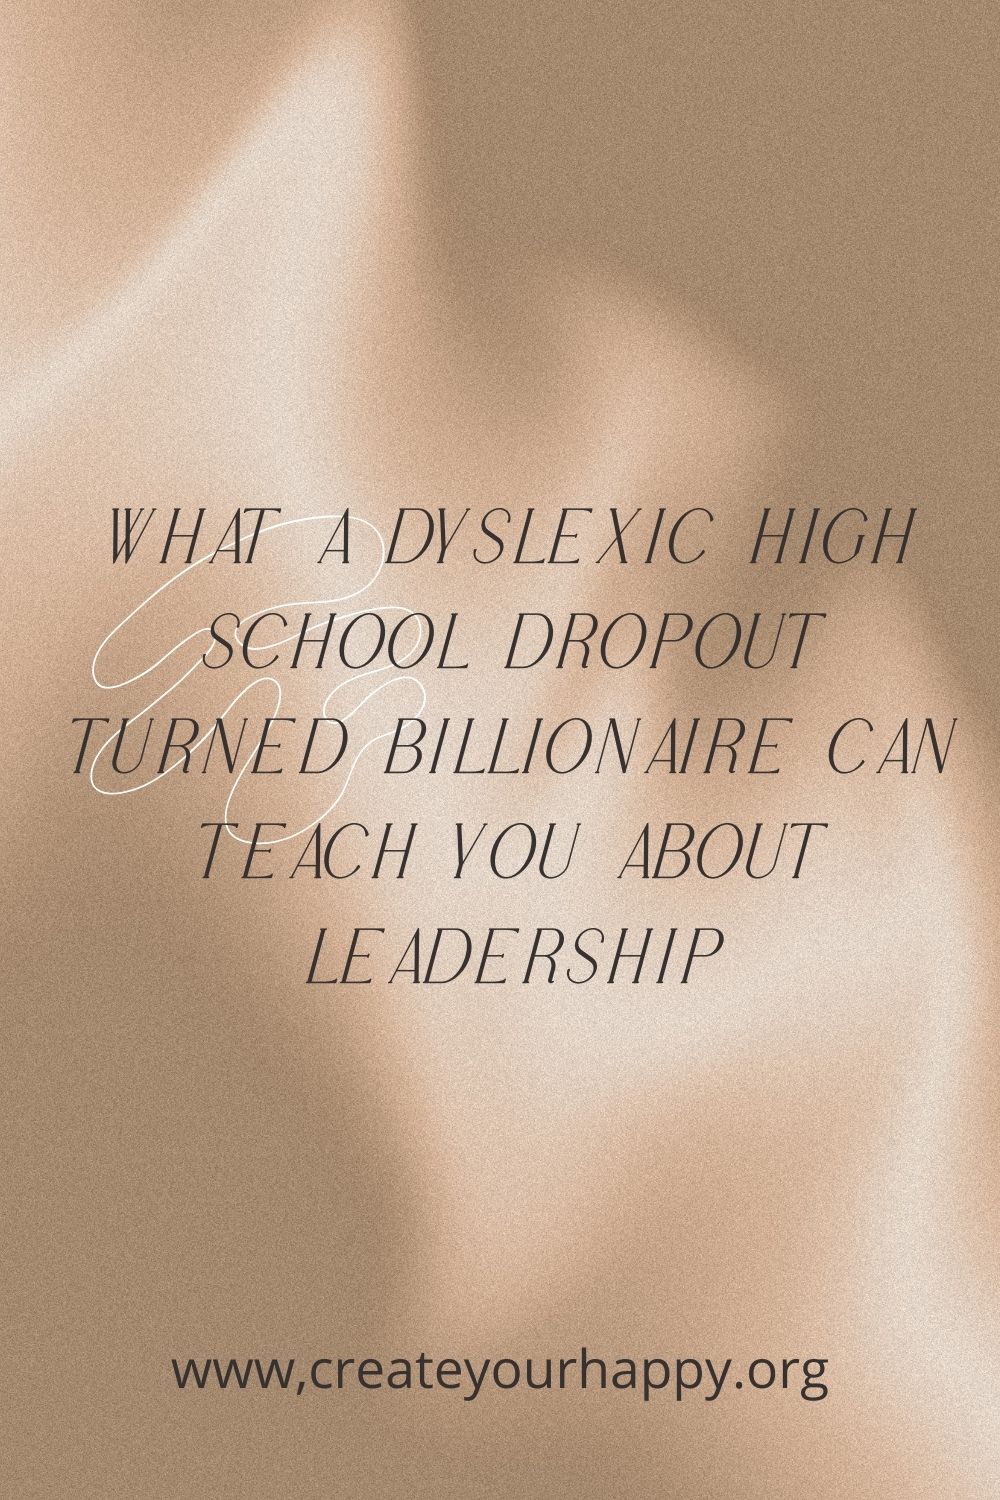 What a Dyslexic High School Dropout Turned Billionaire Can Teach You About Leadership